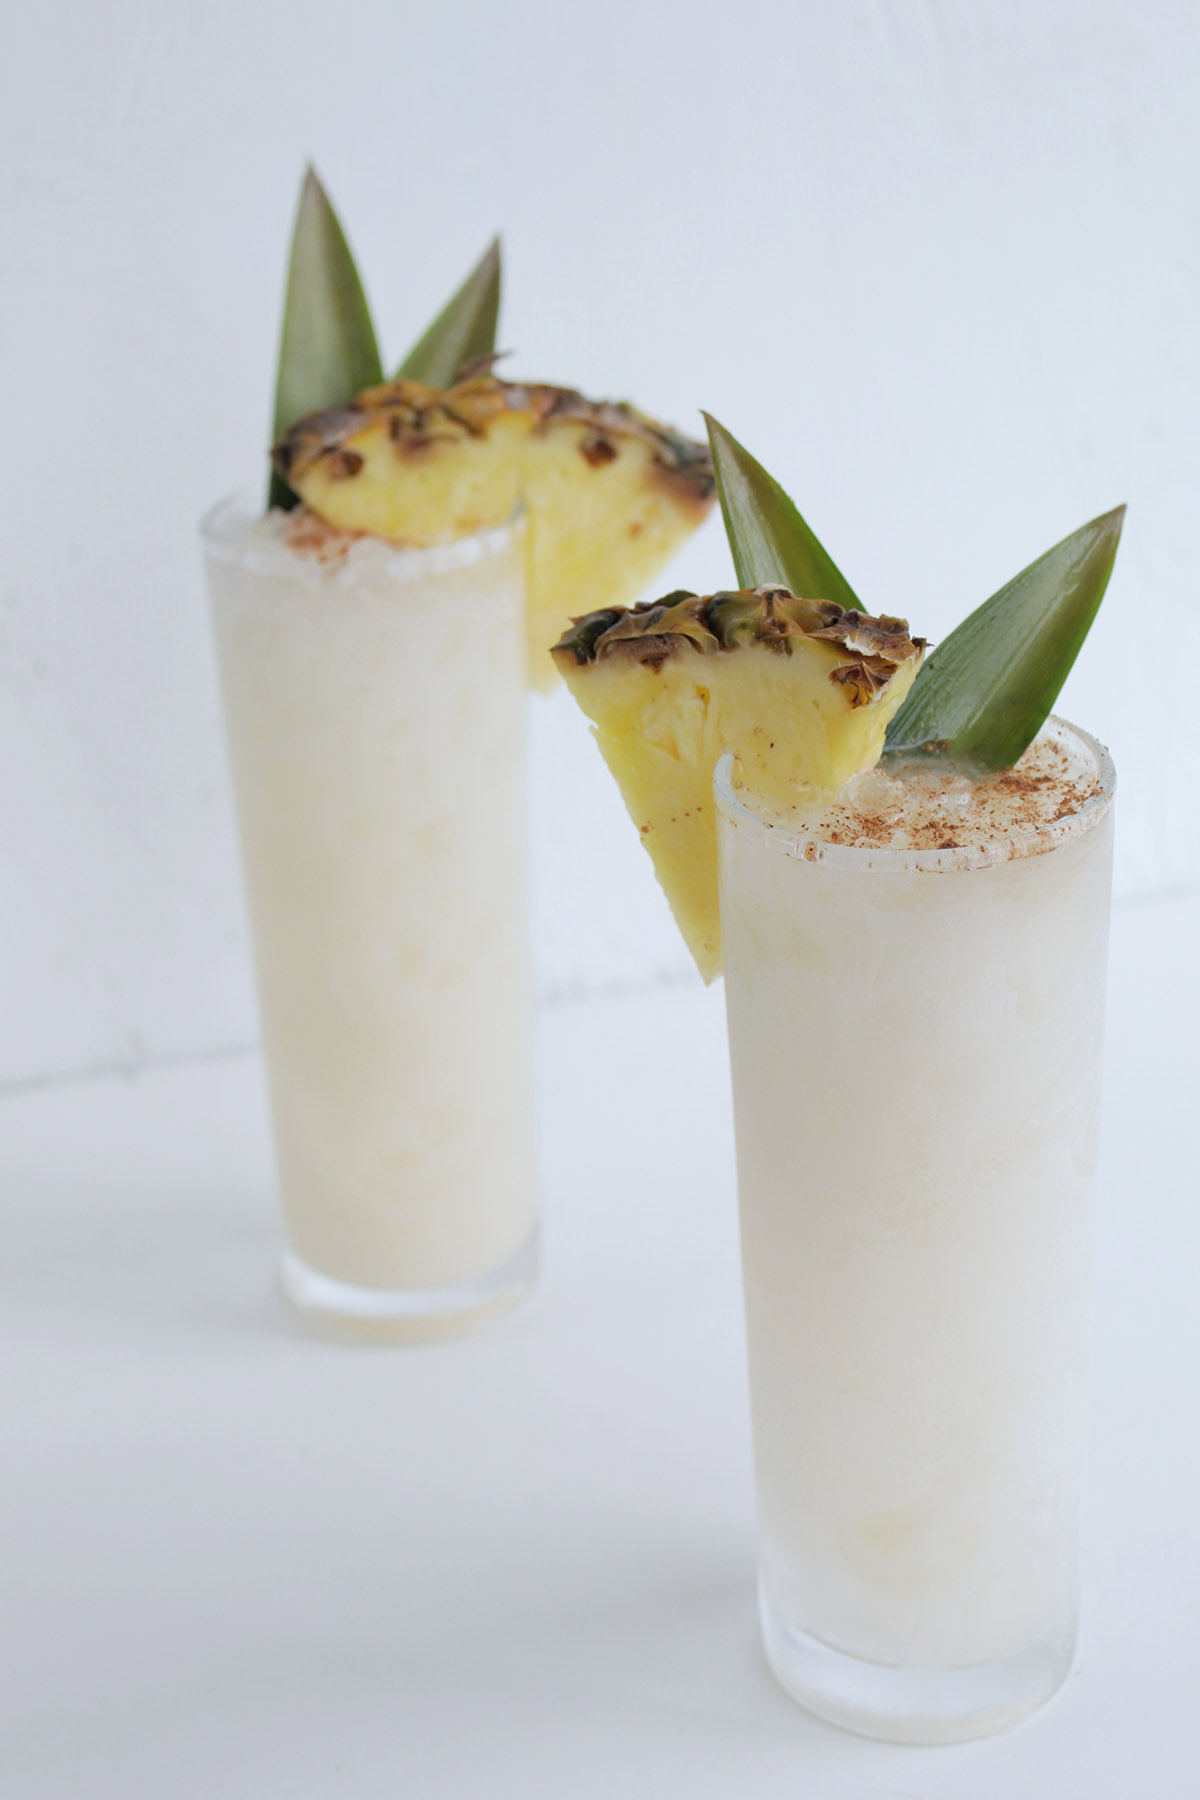 screwball whisky drink with pineapple garnish